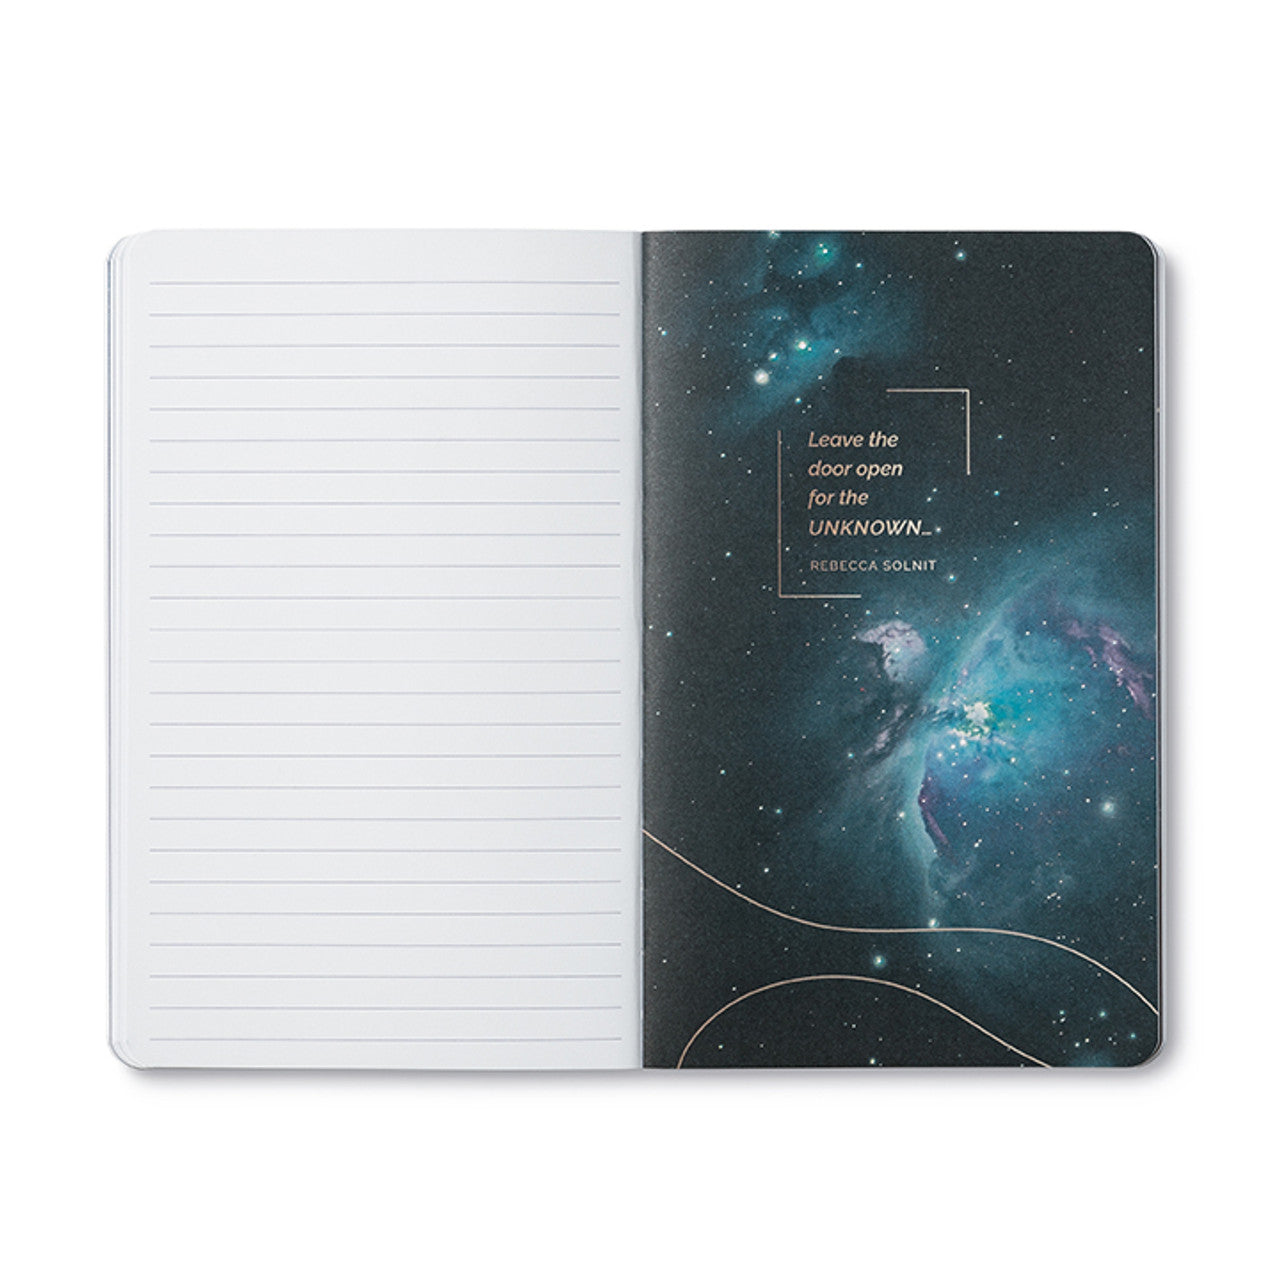 Look to the Stars - Write Now Journal